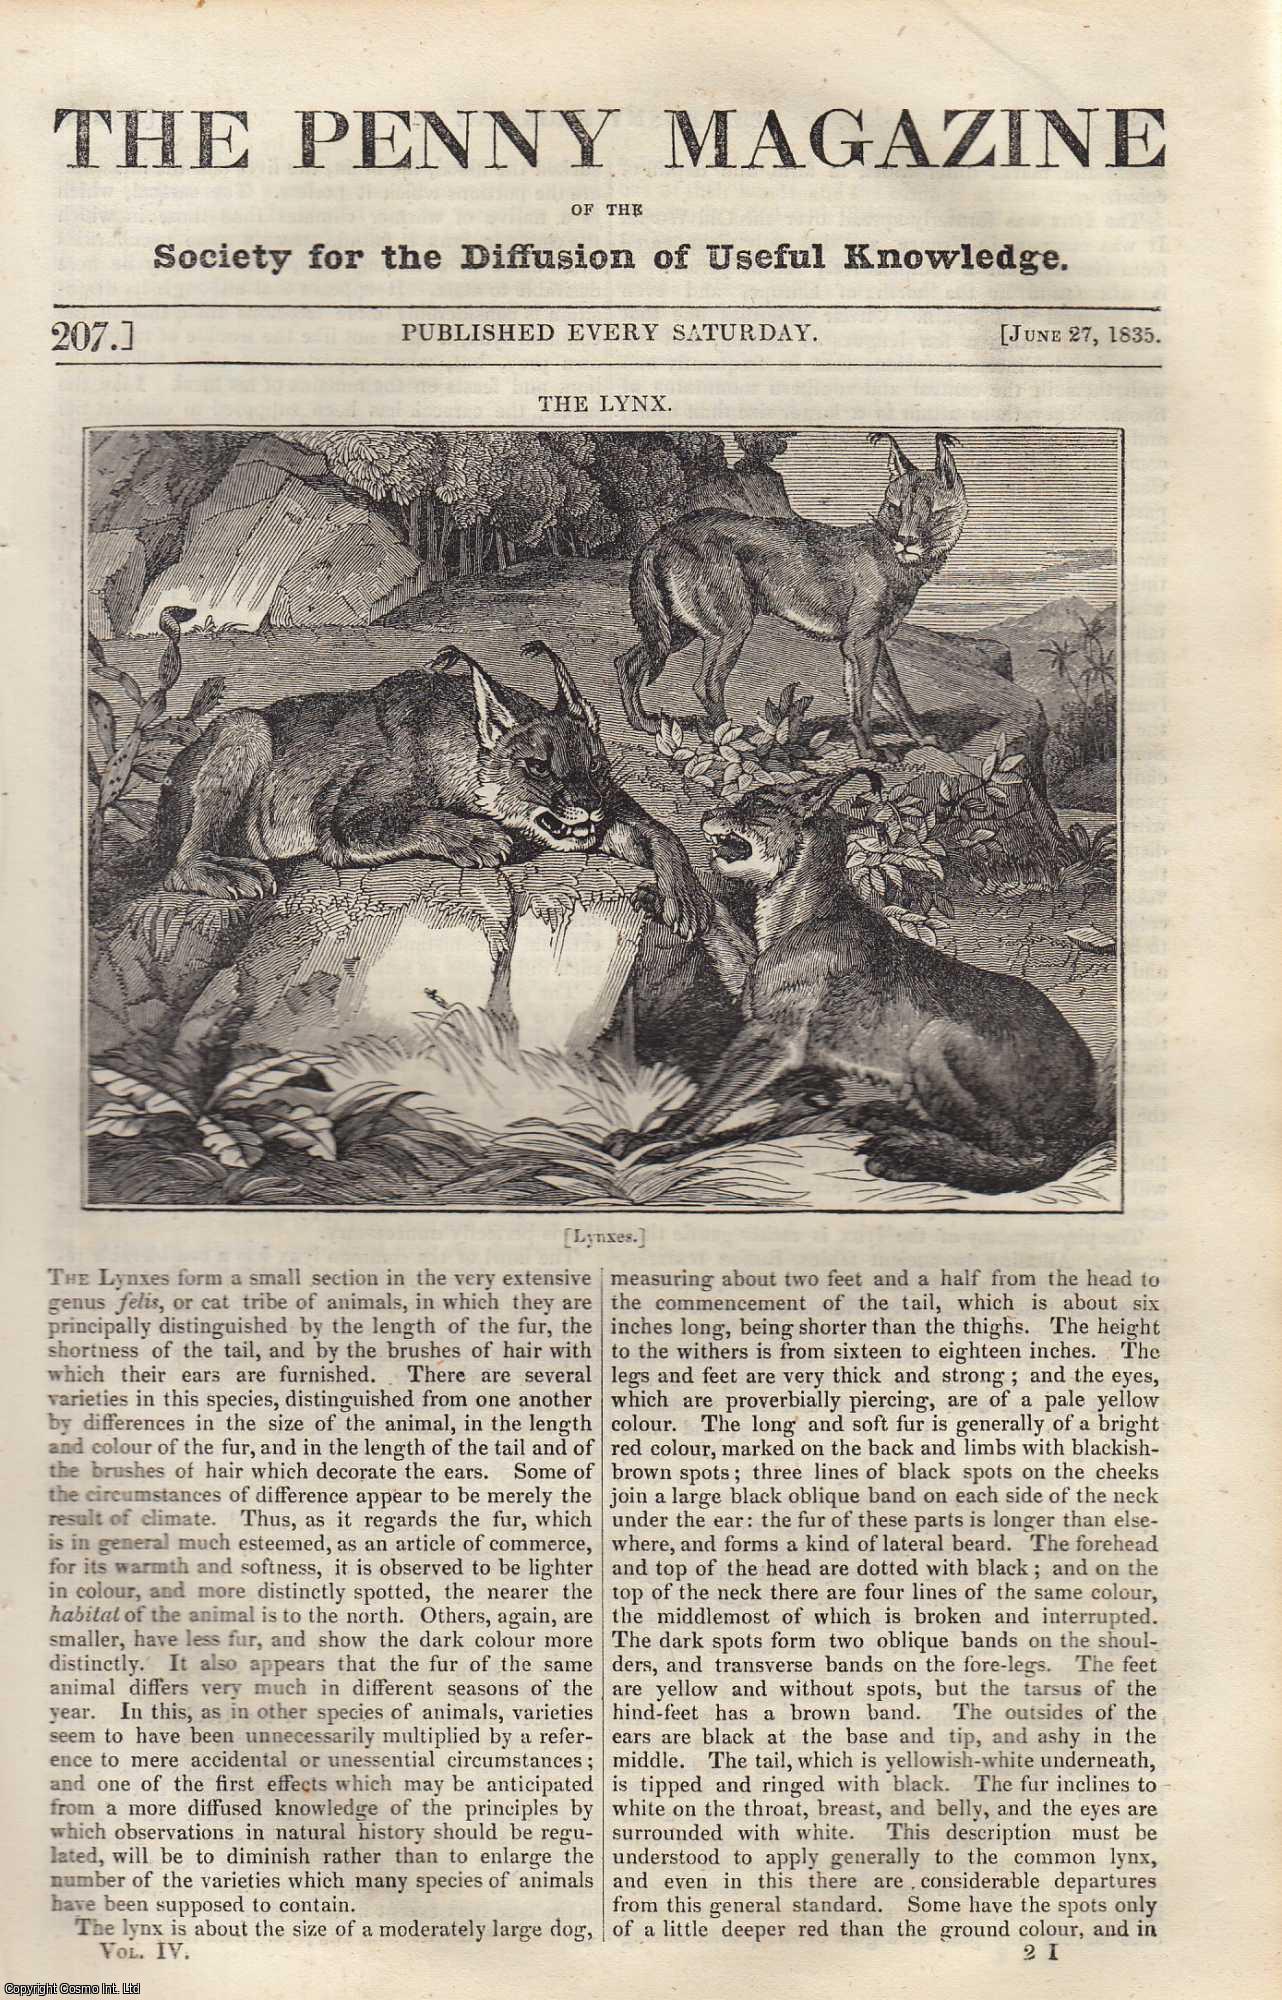 Penny Magazine - The Lynx (genus felis, or cat); Burials in Russia; The Imposture of Garnets Straw; Fountains. Issue No. 207, June 27, 1835. A complete original weekly issue of the Penny Magazine, 1835.